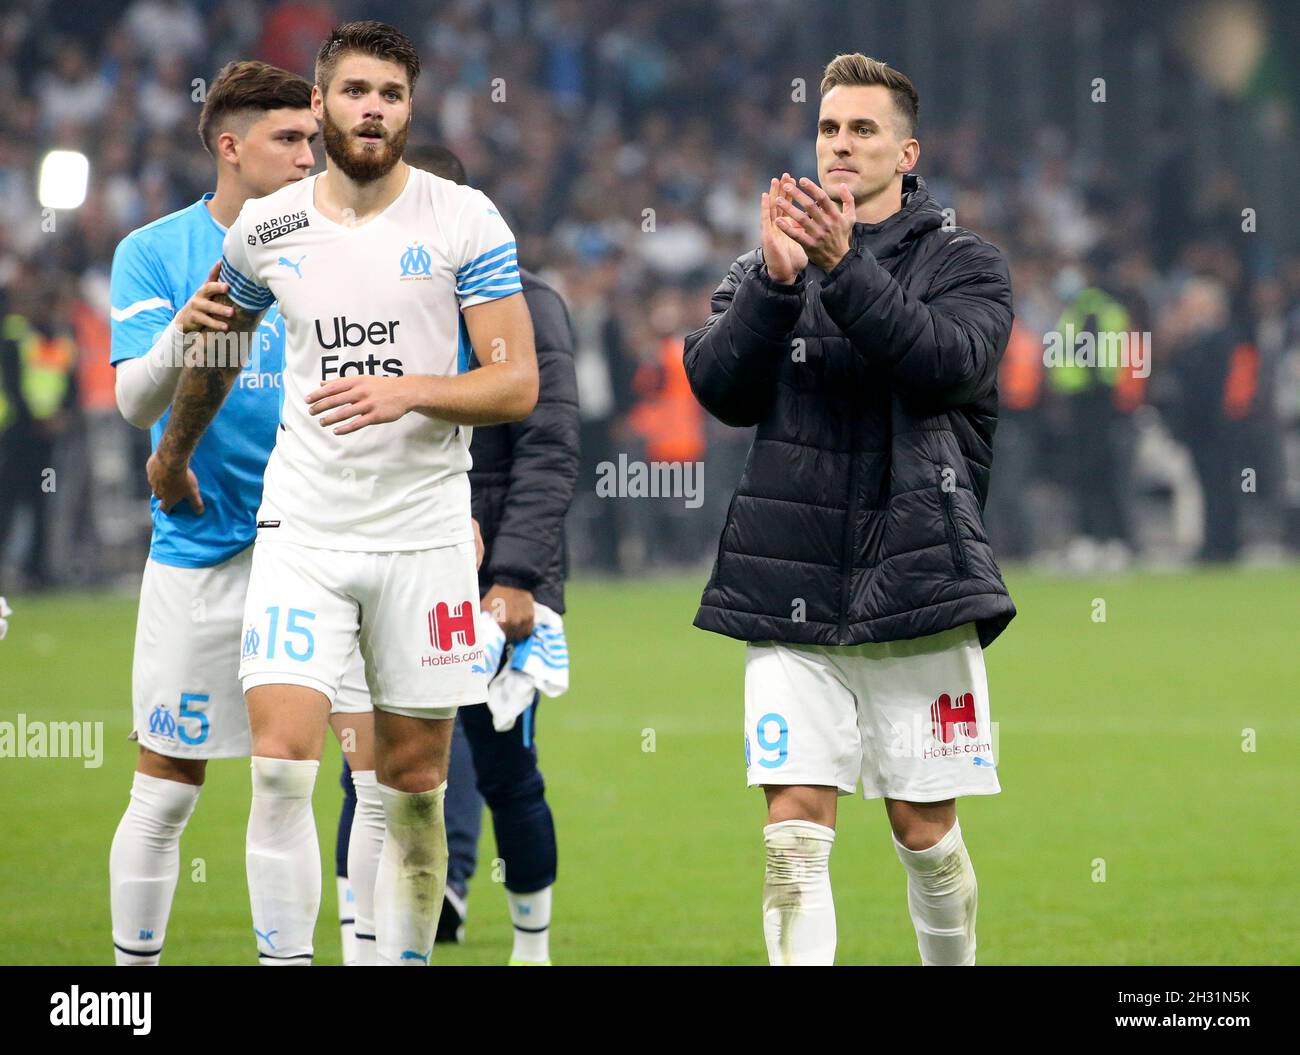 Duje Caleta-Car, Arkadiusz Milik of Marseille salute the supporters  following the French championship Ligue 1 football match between Olympique  de Marseille (OM) and Paris Saint-Germain (PSG) on October 24, 2021 at Stade